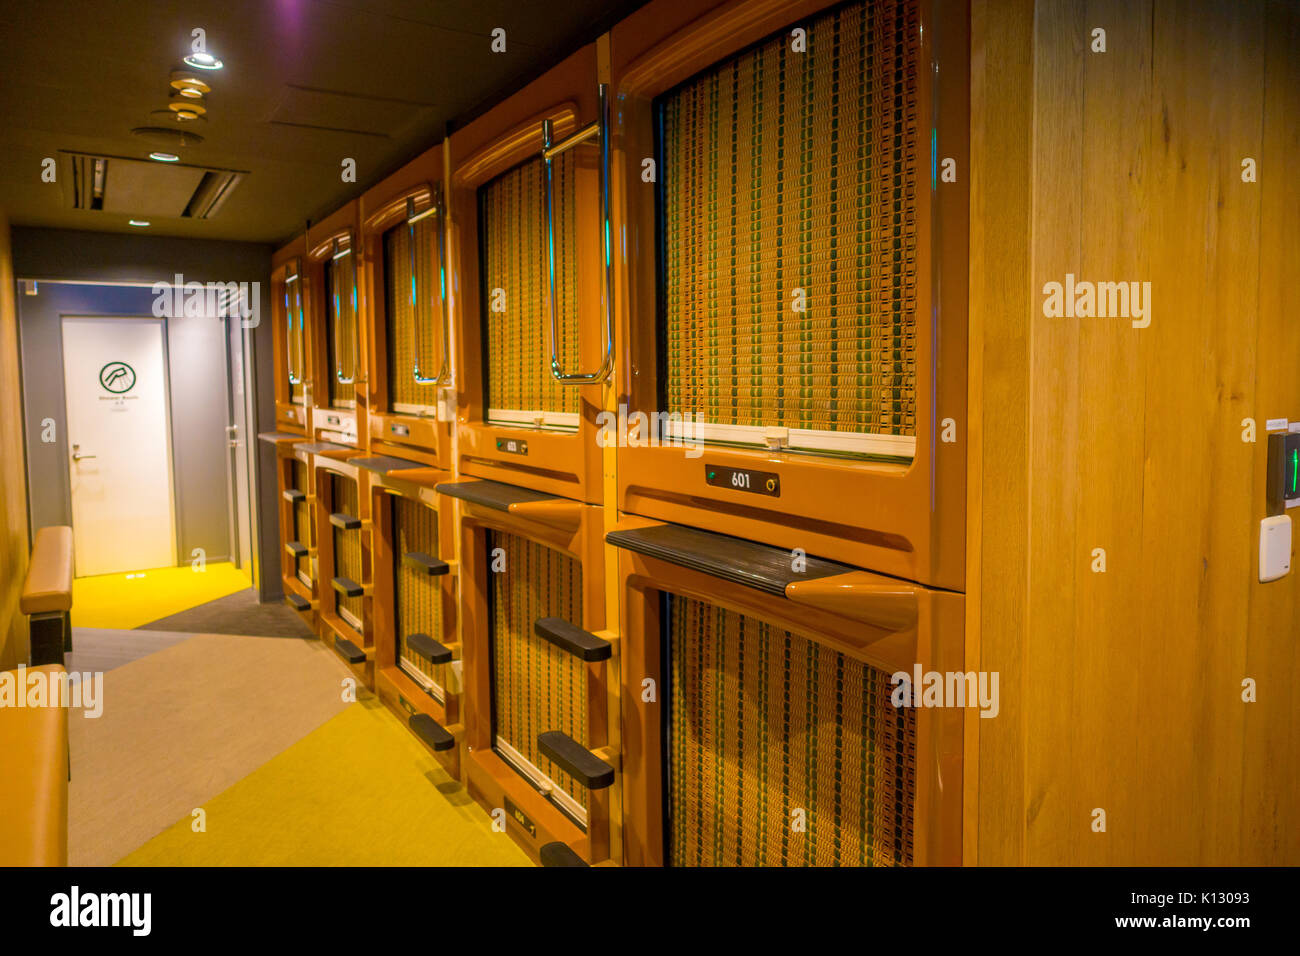 TOKYO, JAPAN JUNE 28 - 2017: Interior view of capsule hotel in city center. Capsule Hotels are less expensive structures very famous in Tokyo Stock Photo